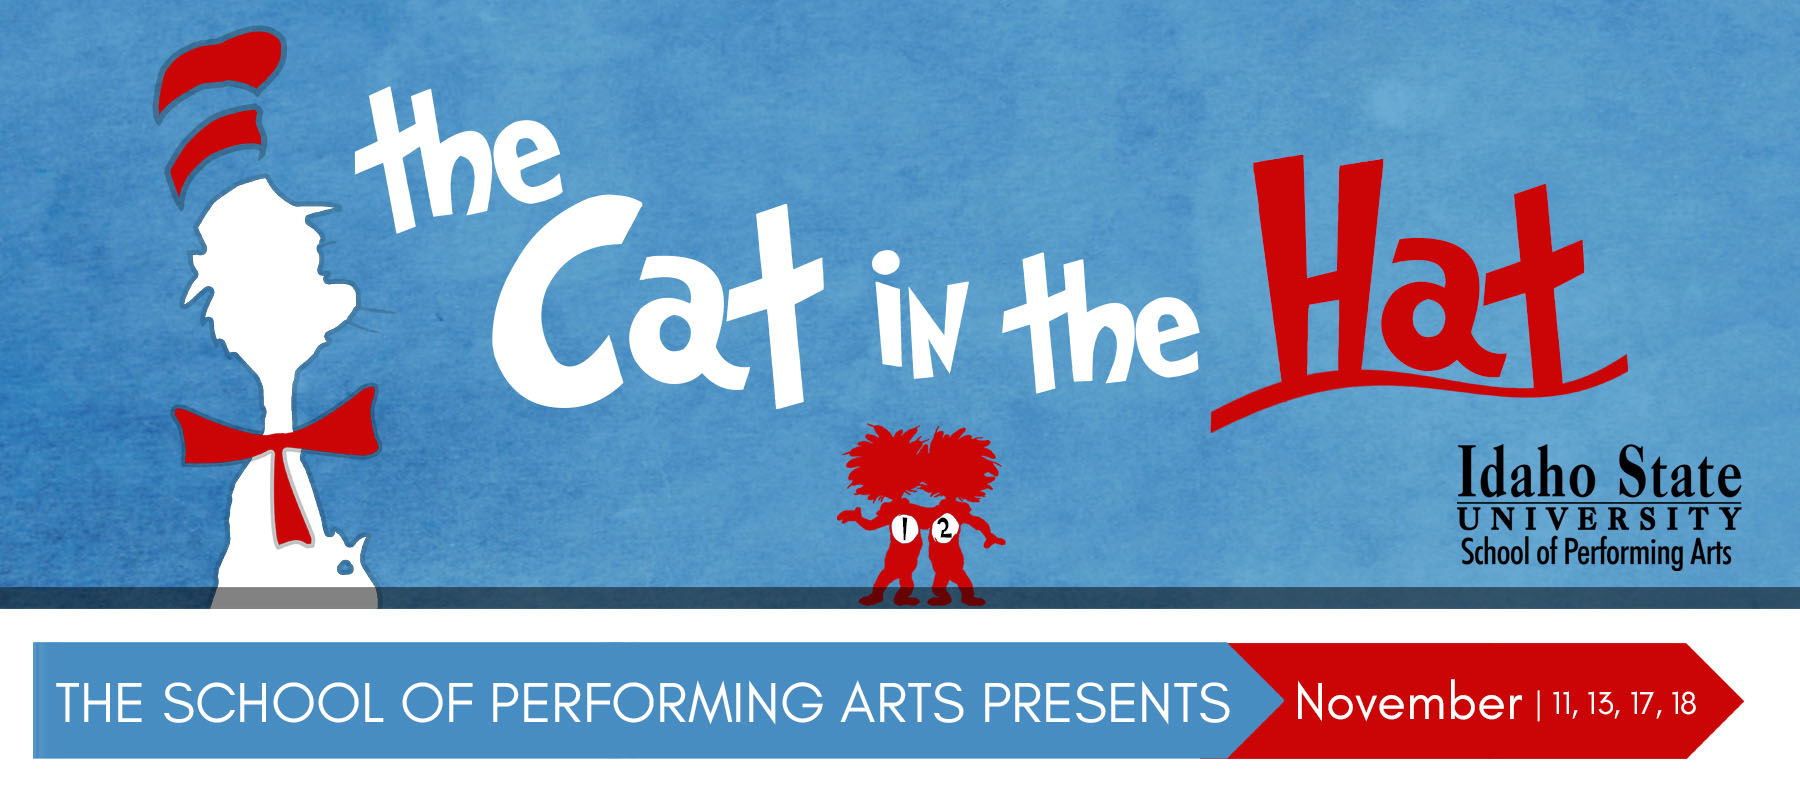 The Cat in the Hat The school of performing arts presents November 11, 13, 17 and 18 Idaho State University School of Performing Arts